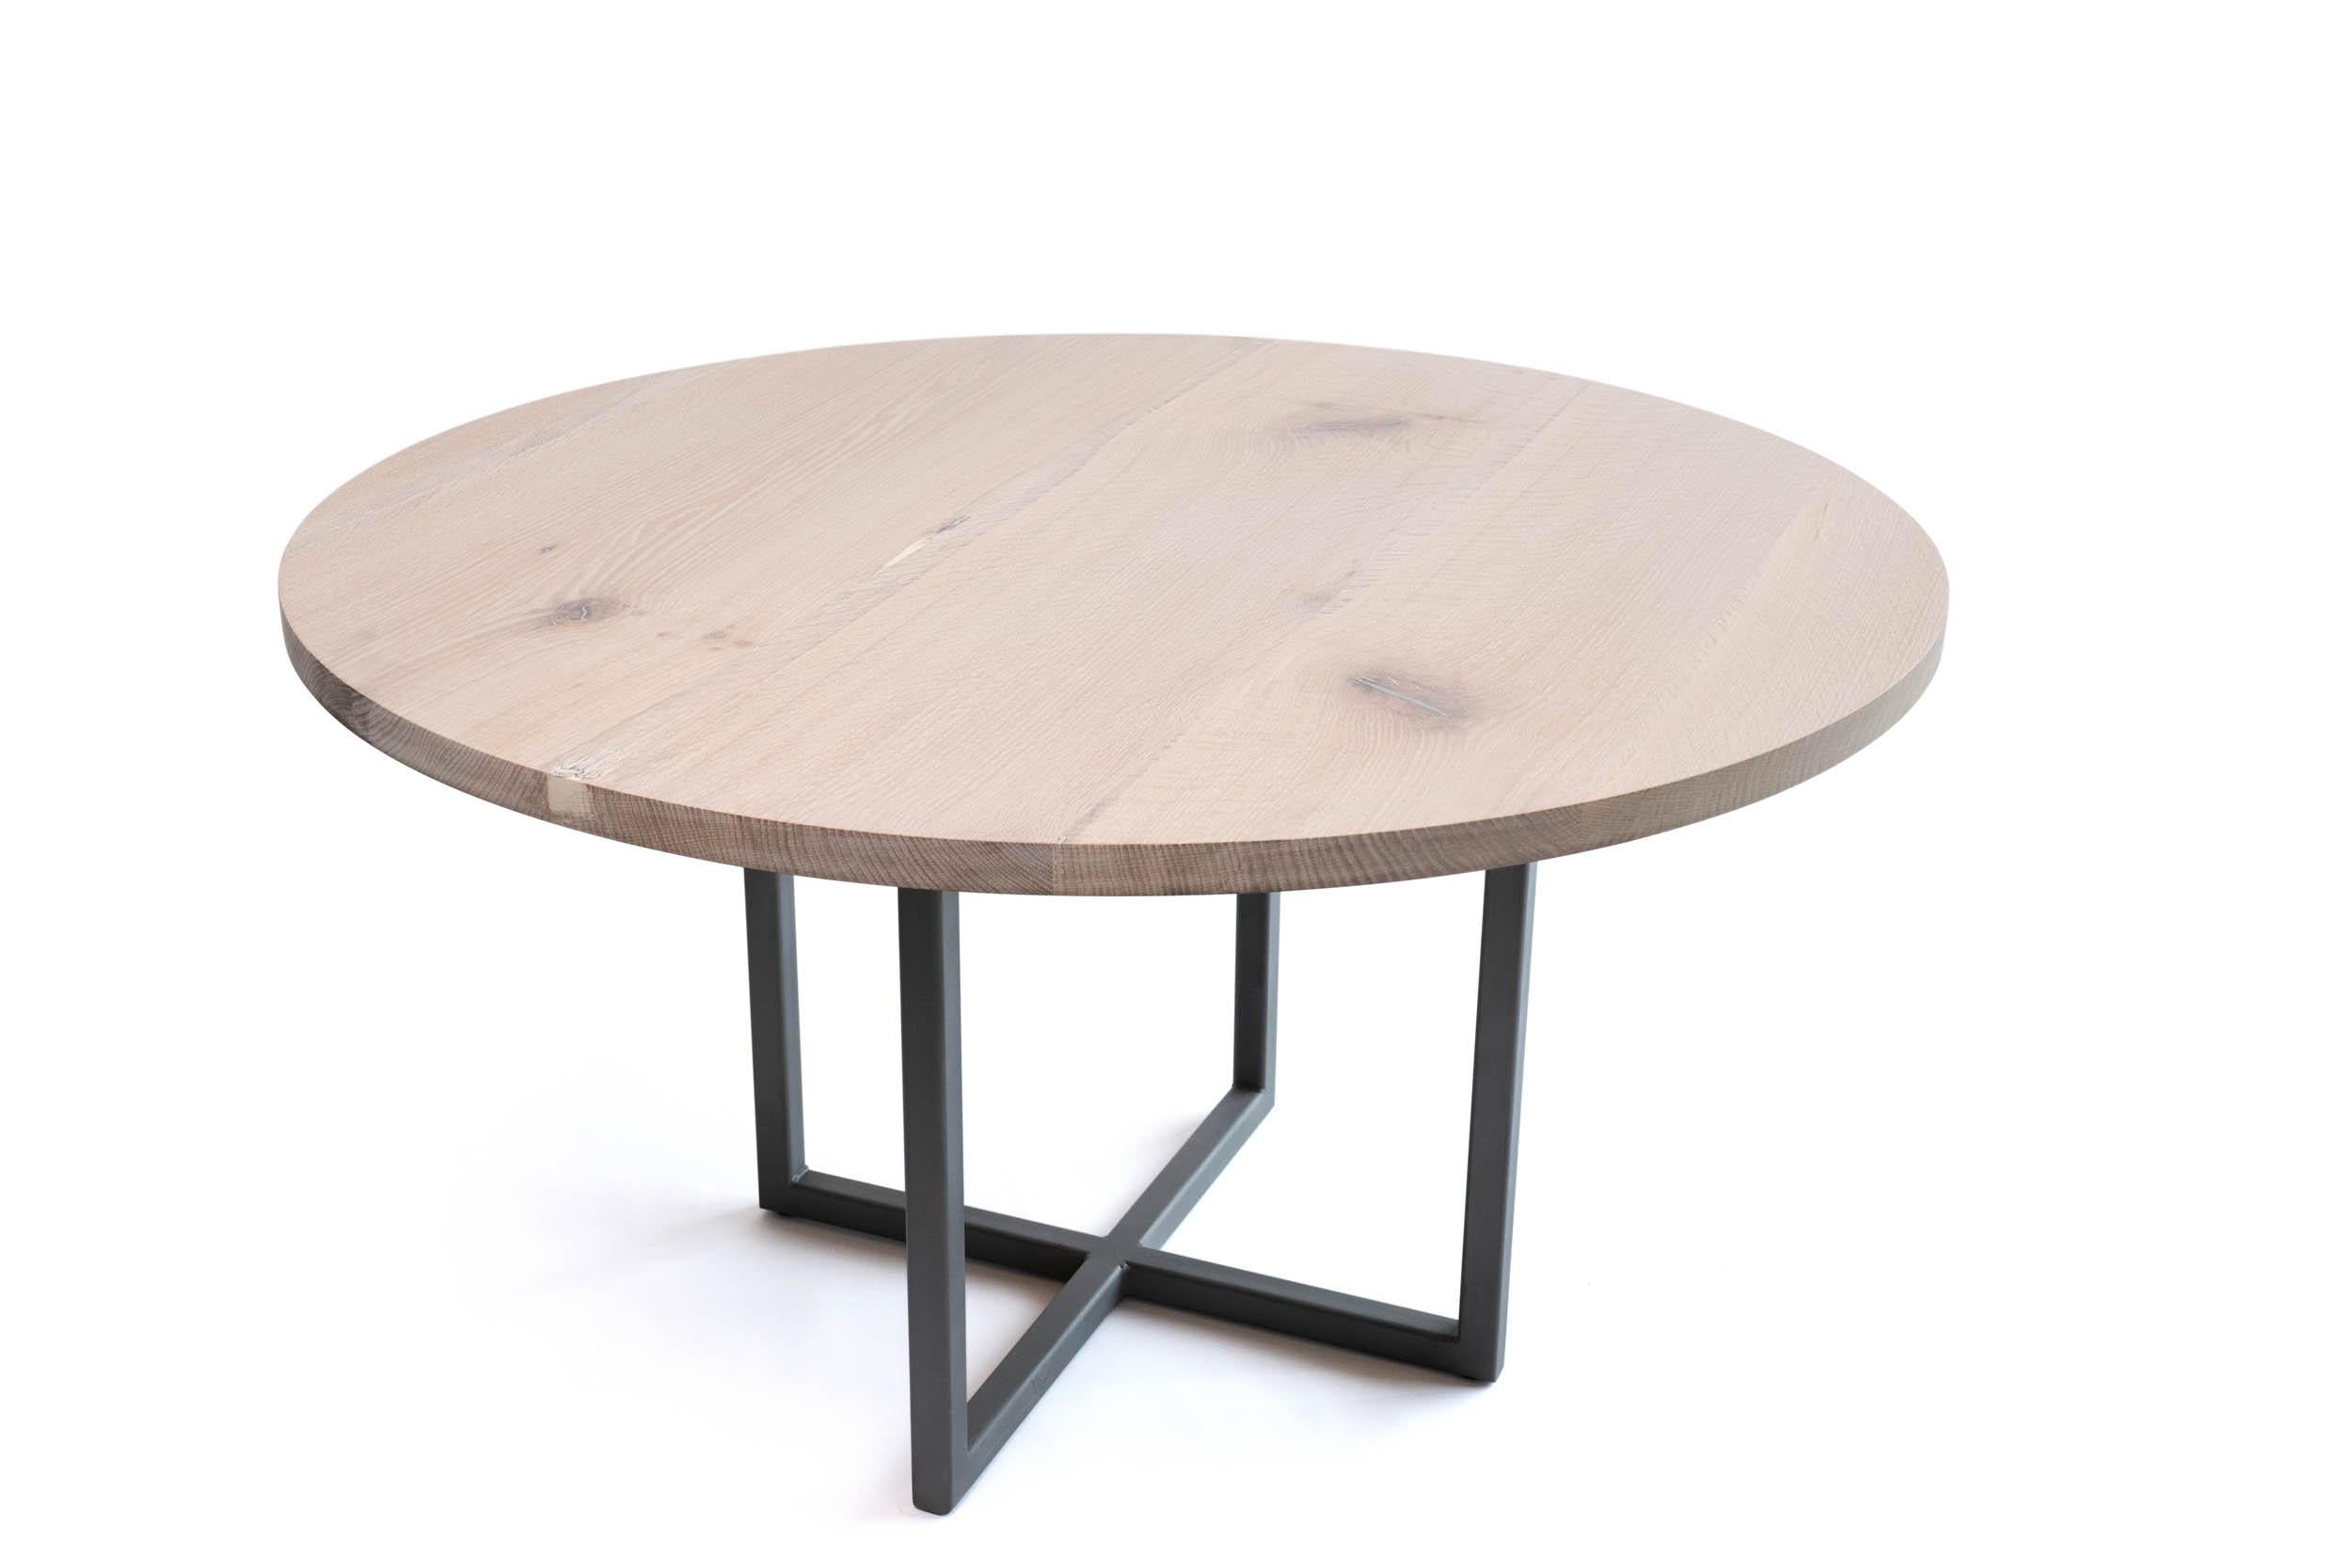 Round Dining Table in Light Wood and Pewter Modern Steel Pedestal Base is a variation of our sunrise base. Urban white oak with a white finish and unique pewter fills, emphasizes it casual and refined feel, begging you to touch and enjoy. The